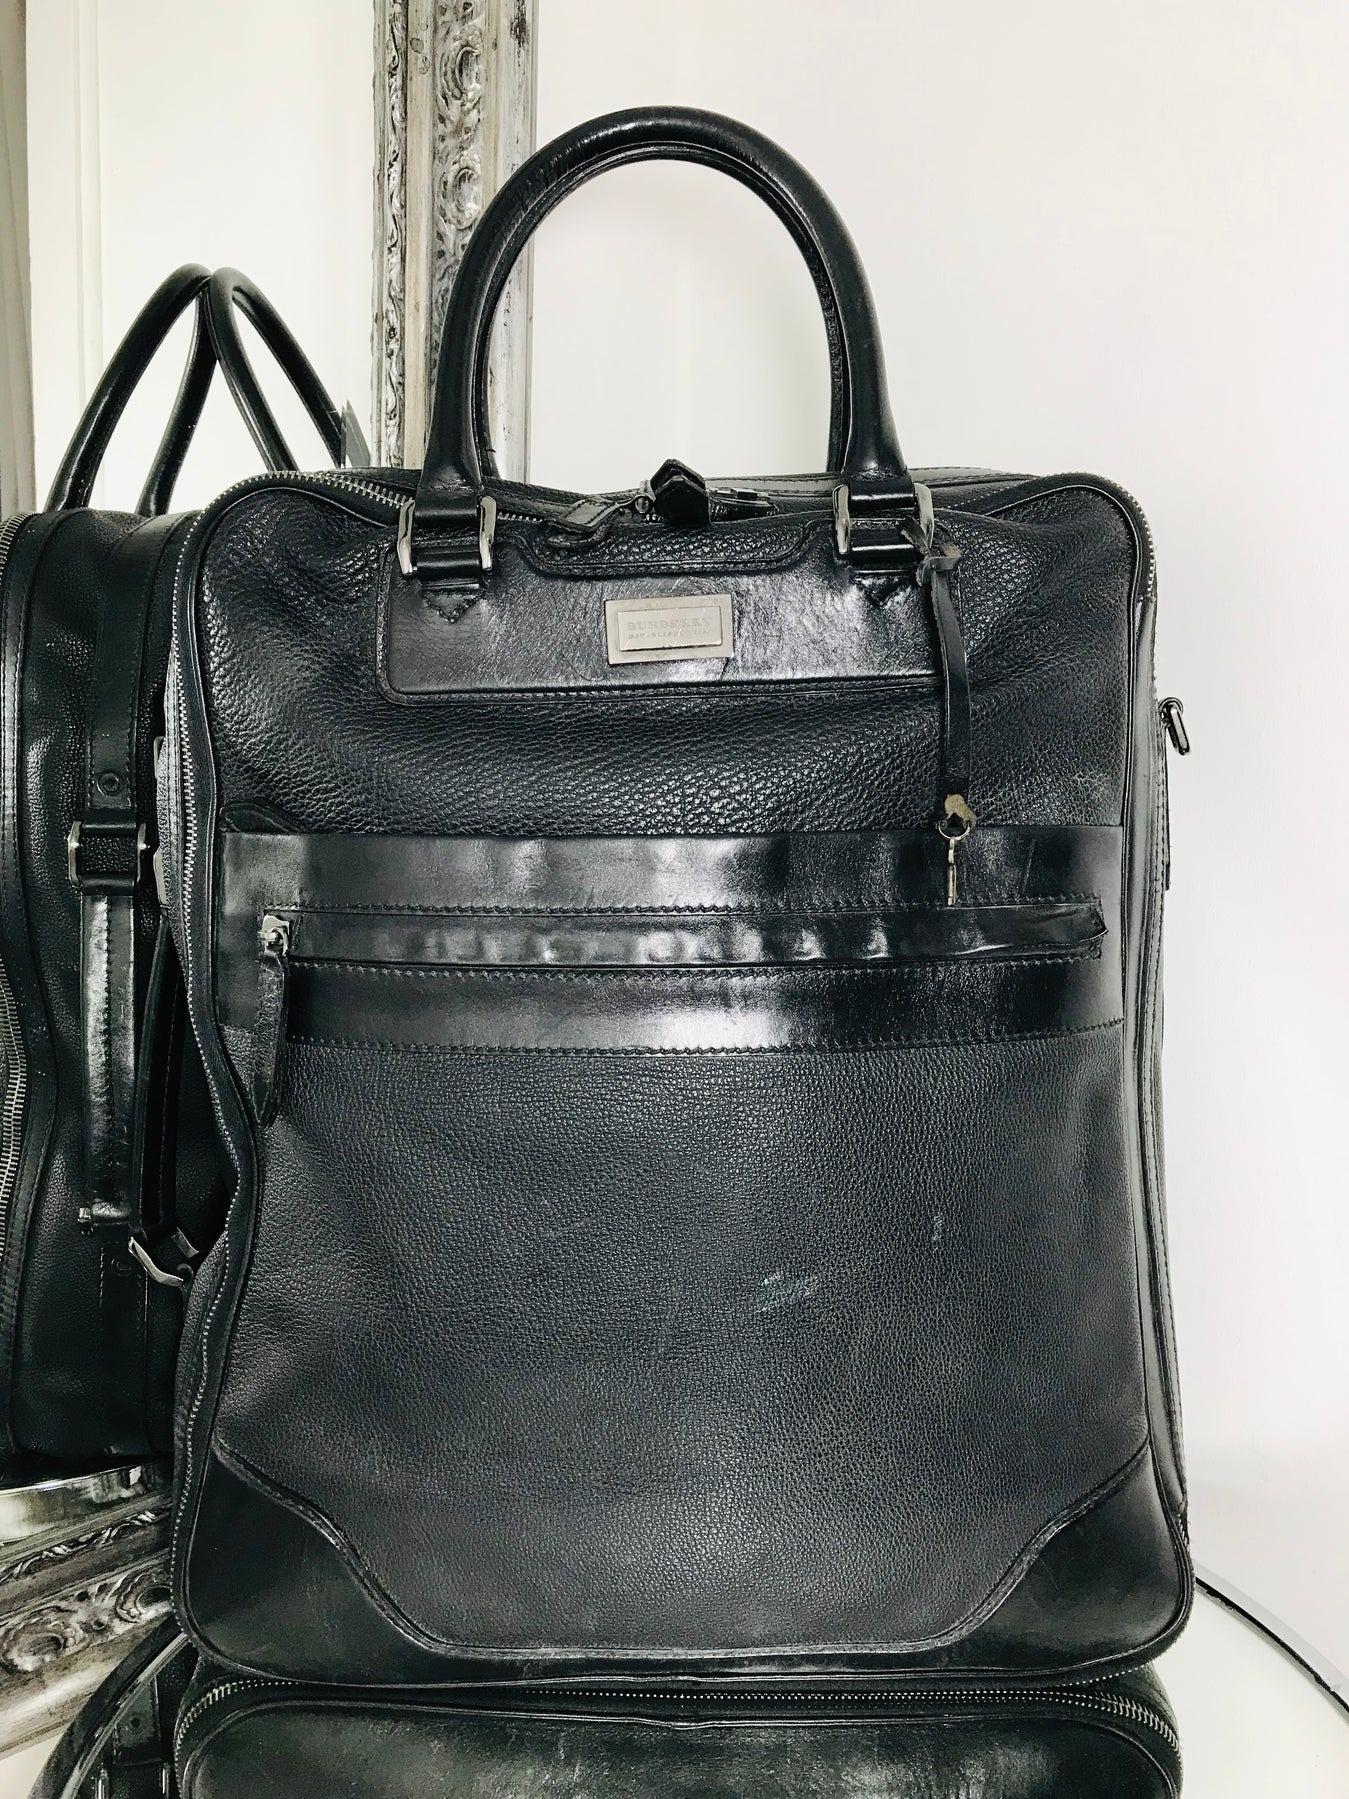 Black Leather Travel Bag by Burberry

Round top carry handles and removable, adjustable shoulder strap. Two front zip pockets and multiple interior pockets. Two large interior compartment. Black metallic hardware and padlock.

Additional